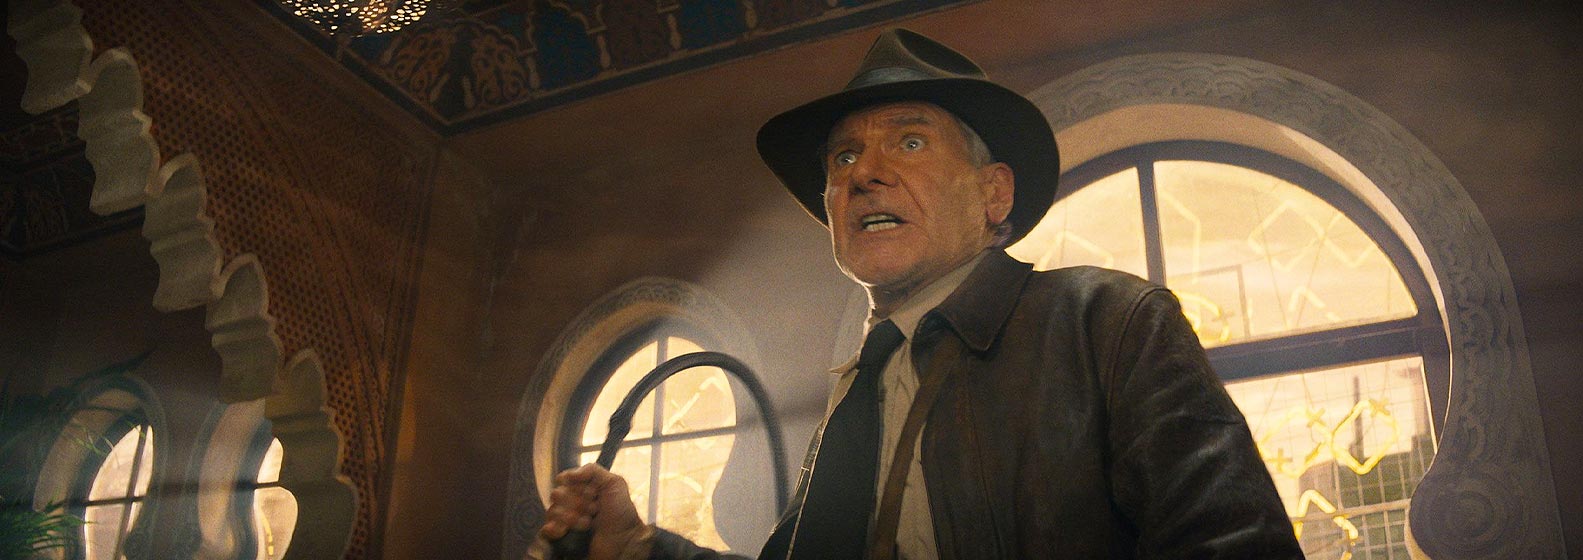 Indiana Jones and the Dial of Destiny - Header Image